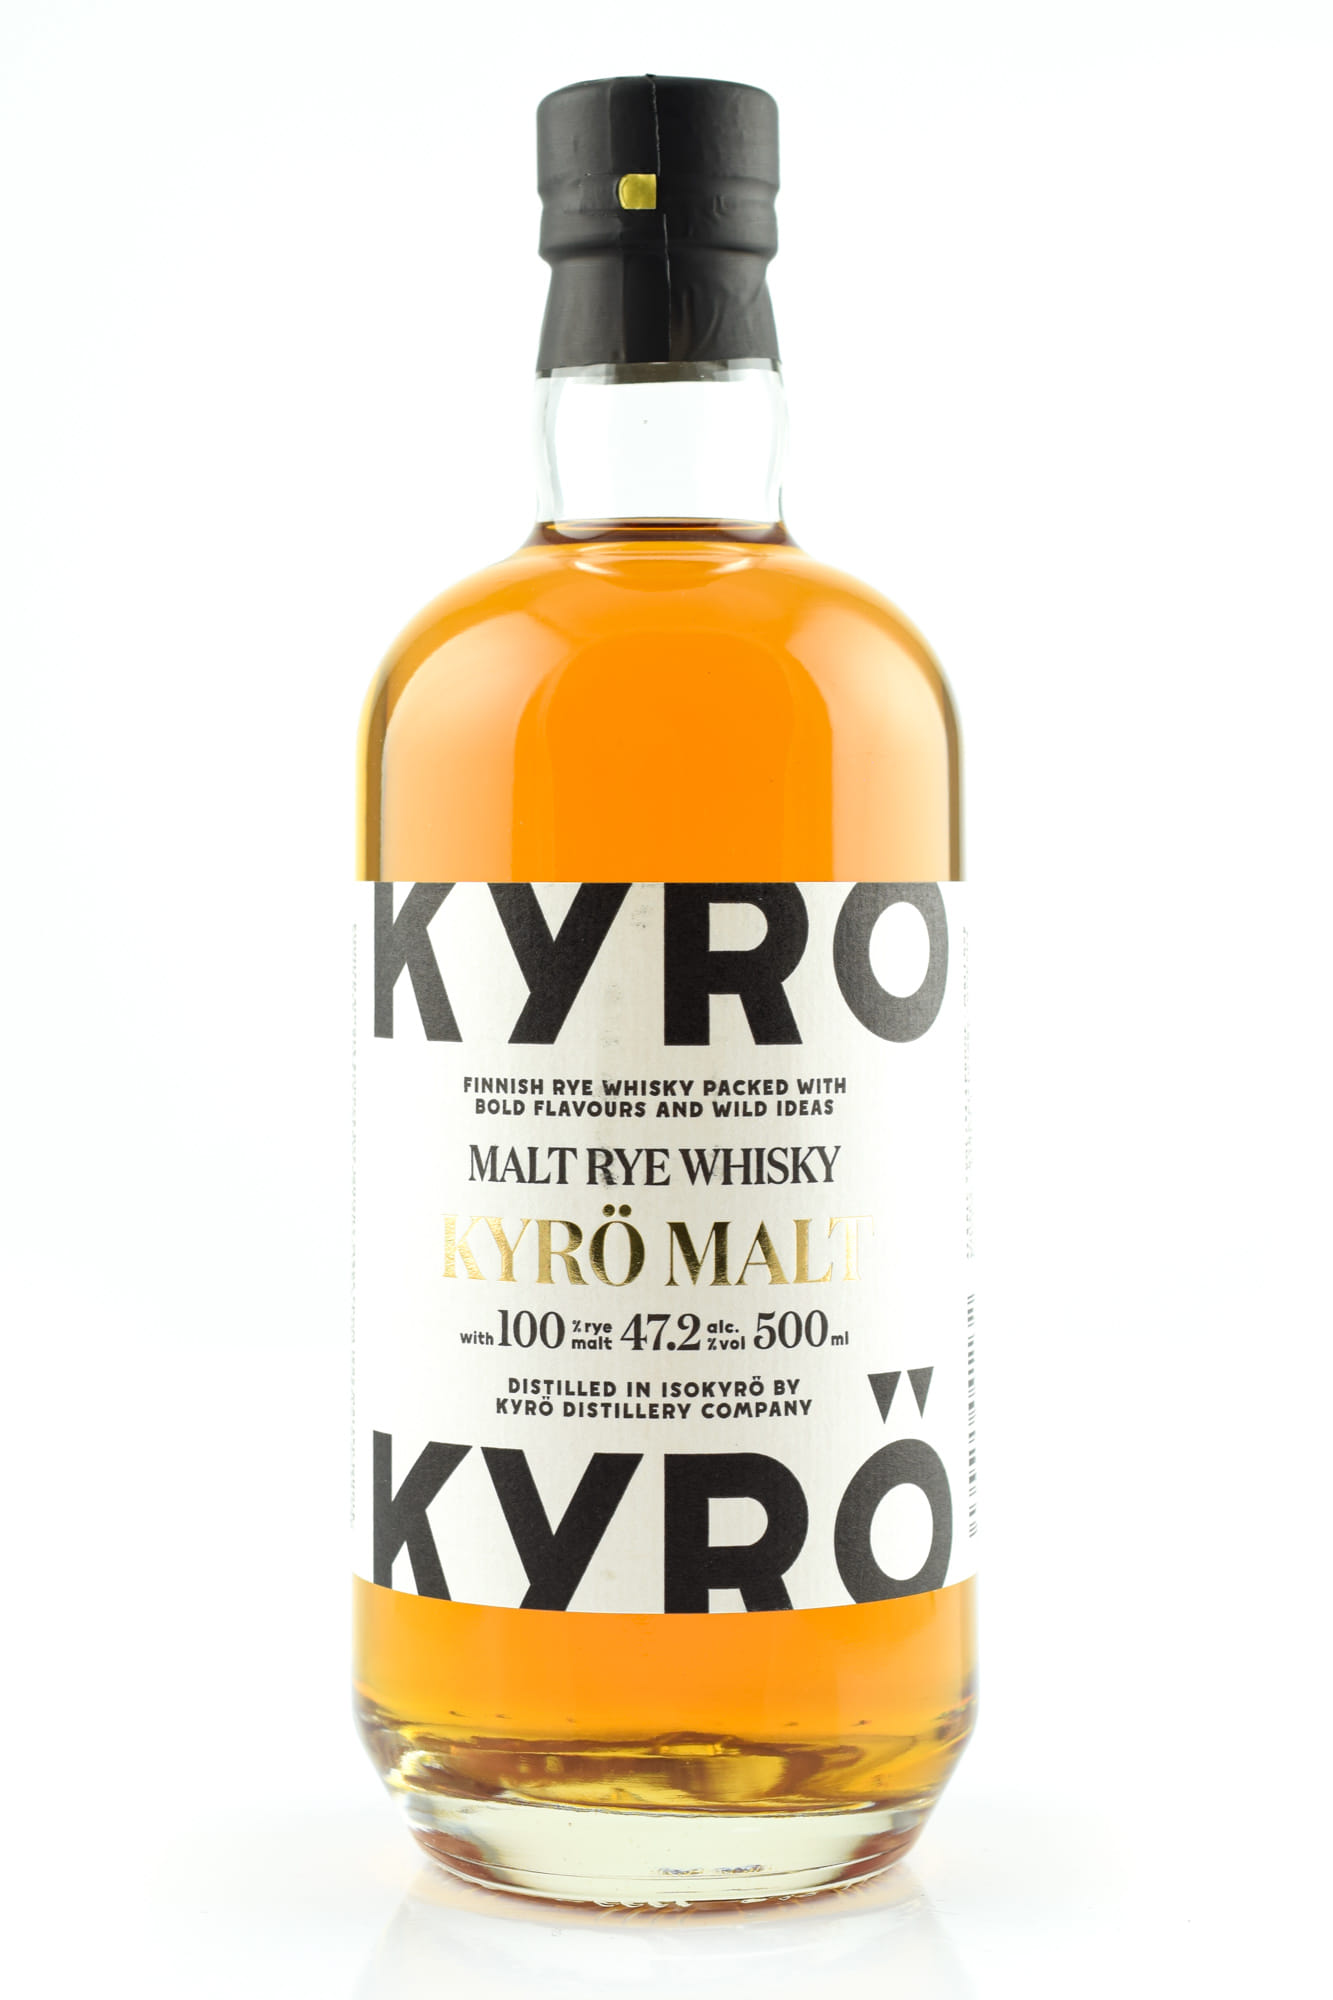 | Malts Home now! Home Malts Malt Whisky explore of Rye of at Kyrö >>